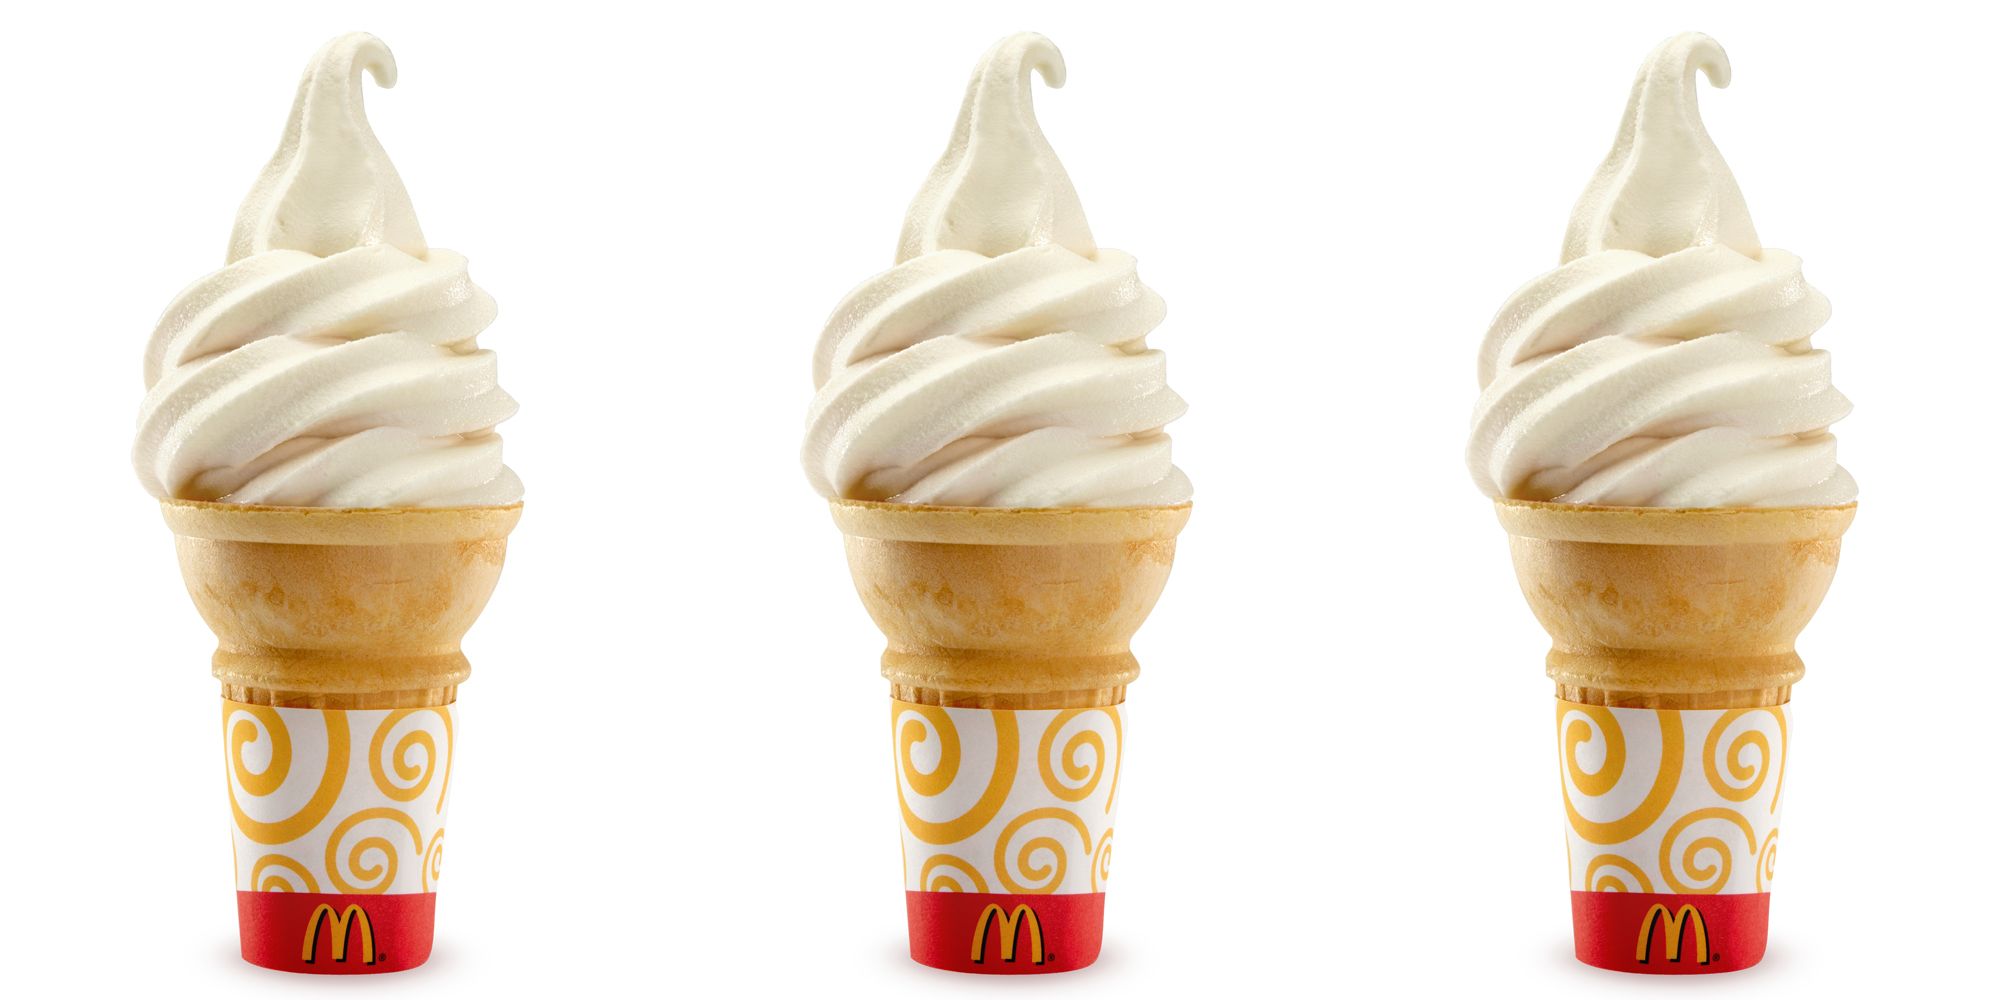 Is McDonald’s Ice Cream Toxic For Dogs?